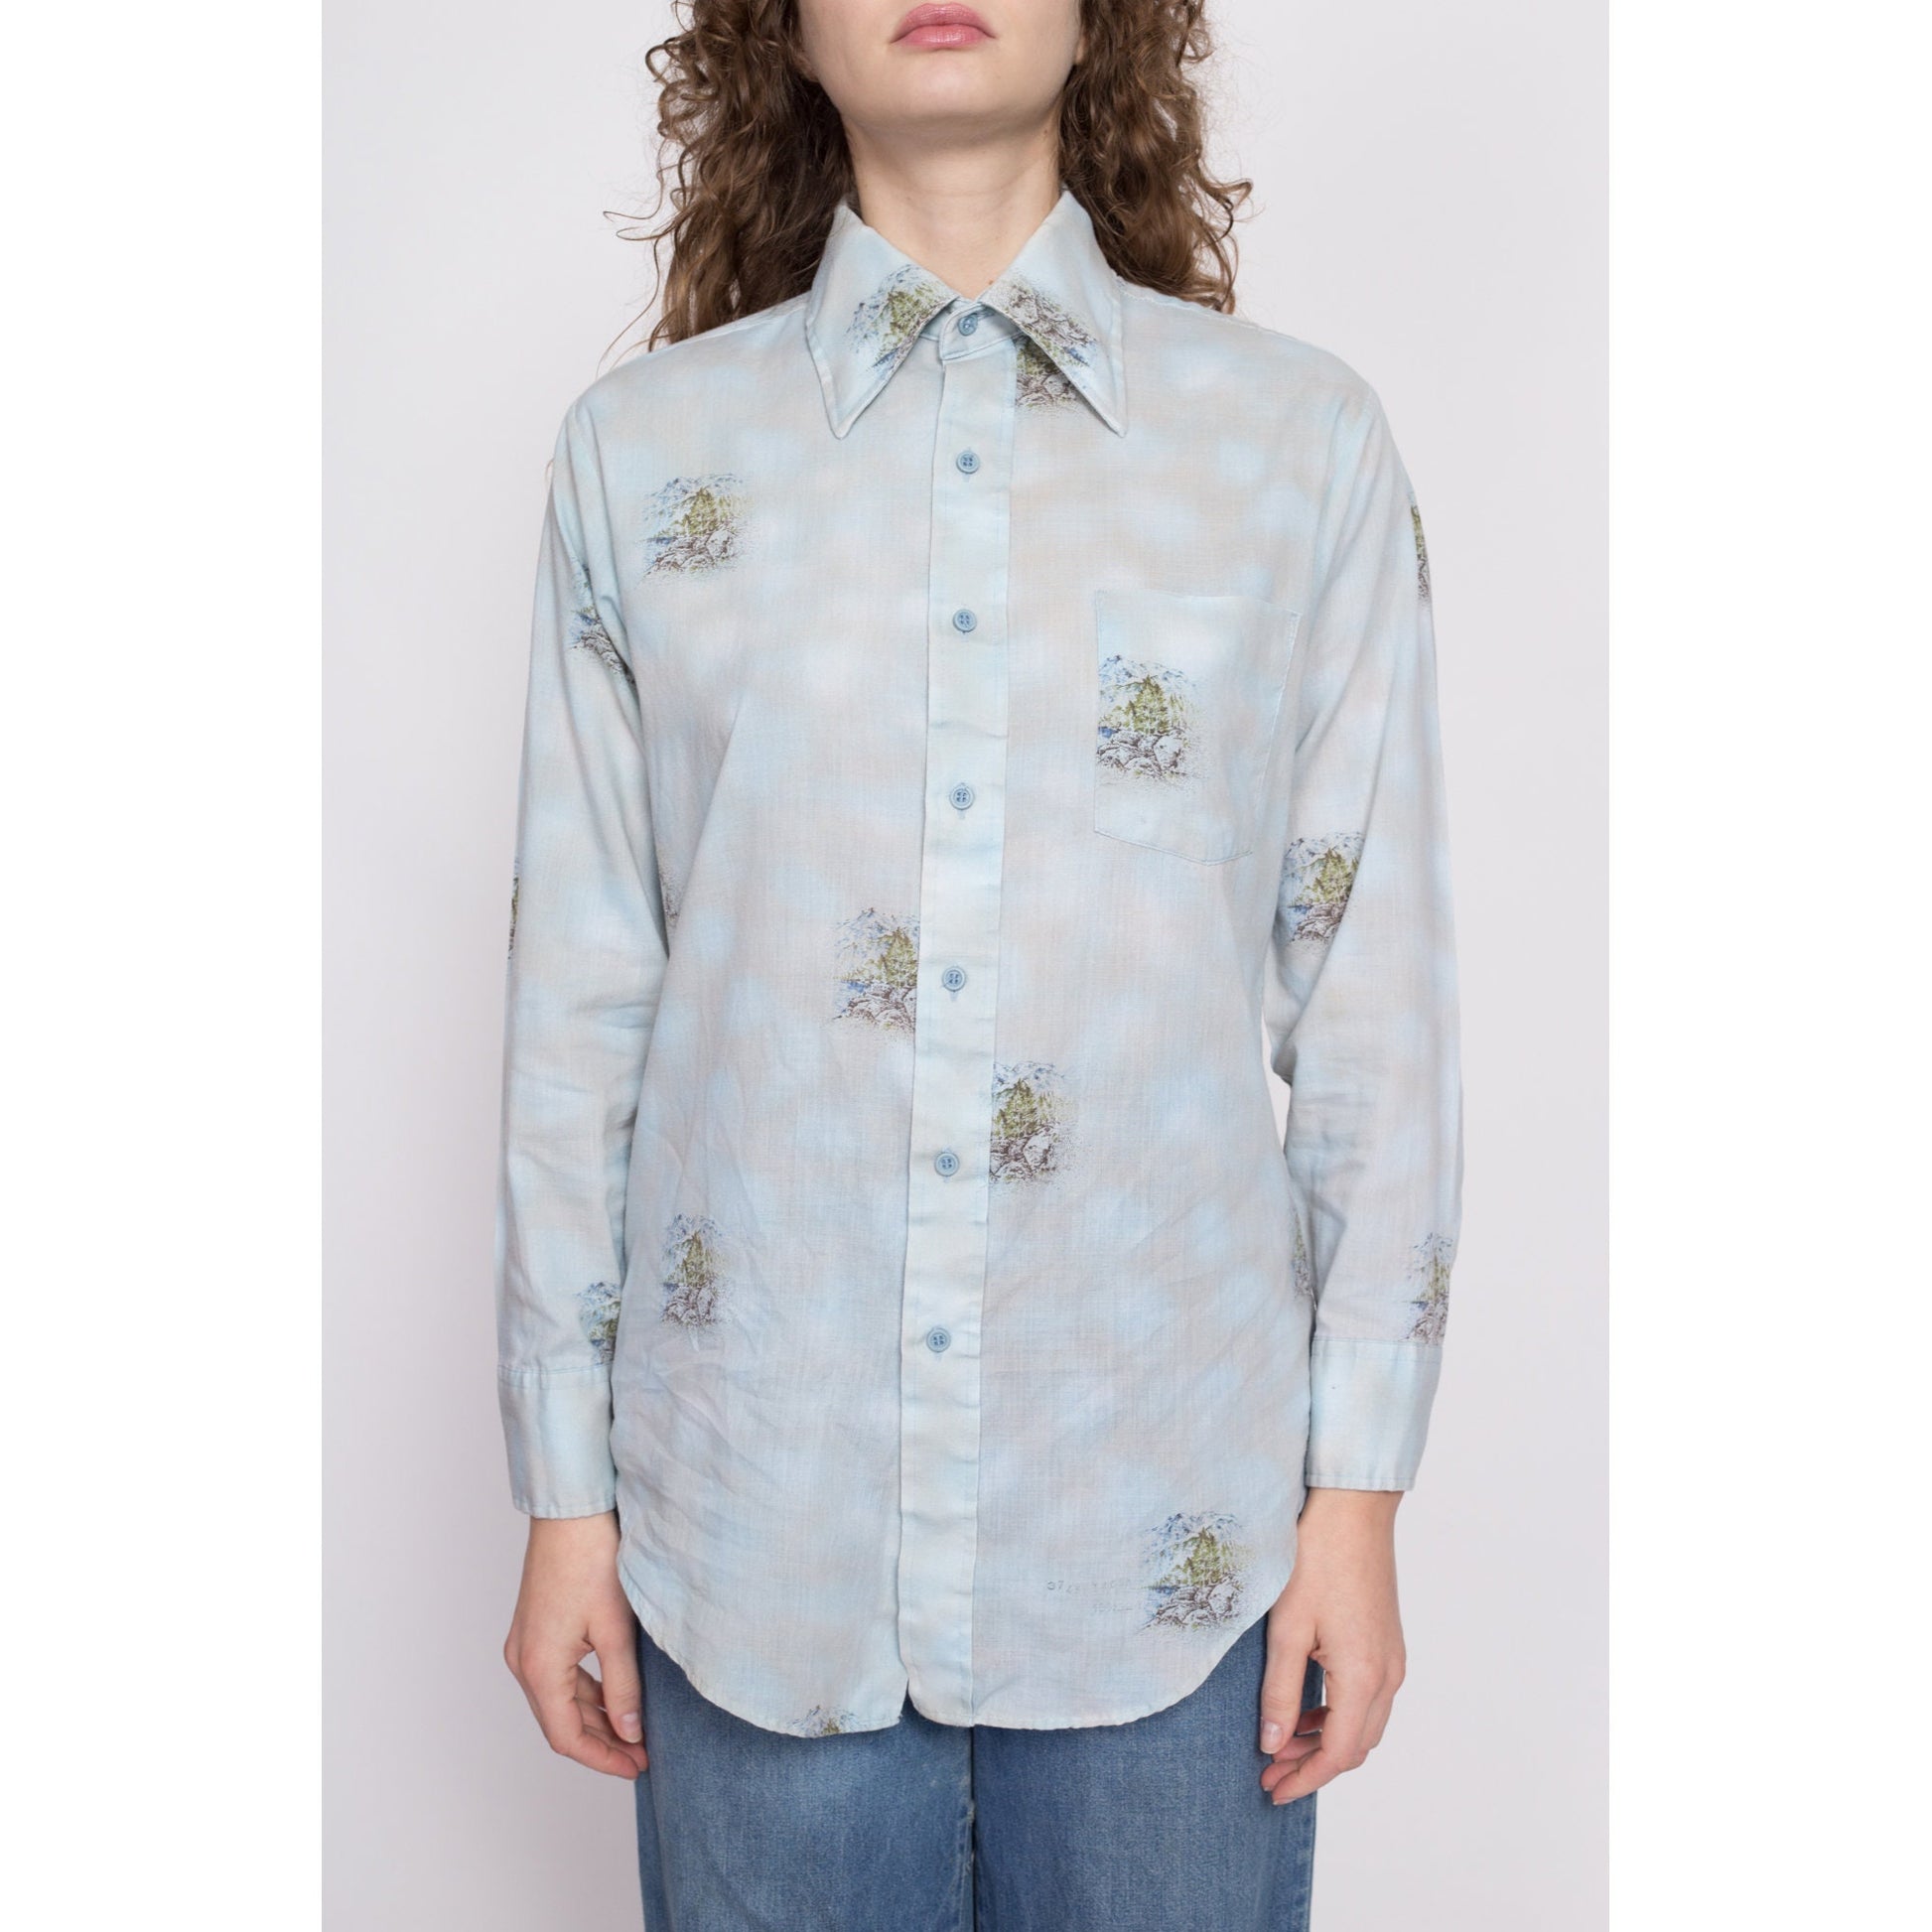 70s Mountain River Scene Novelty Print Shirt - Men's Medium | Vintage Blue Boho Button Up Pointed Collared Top